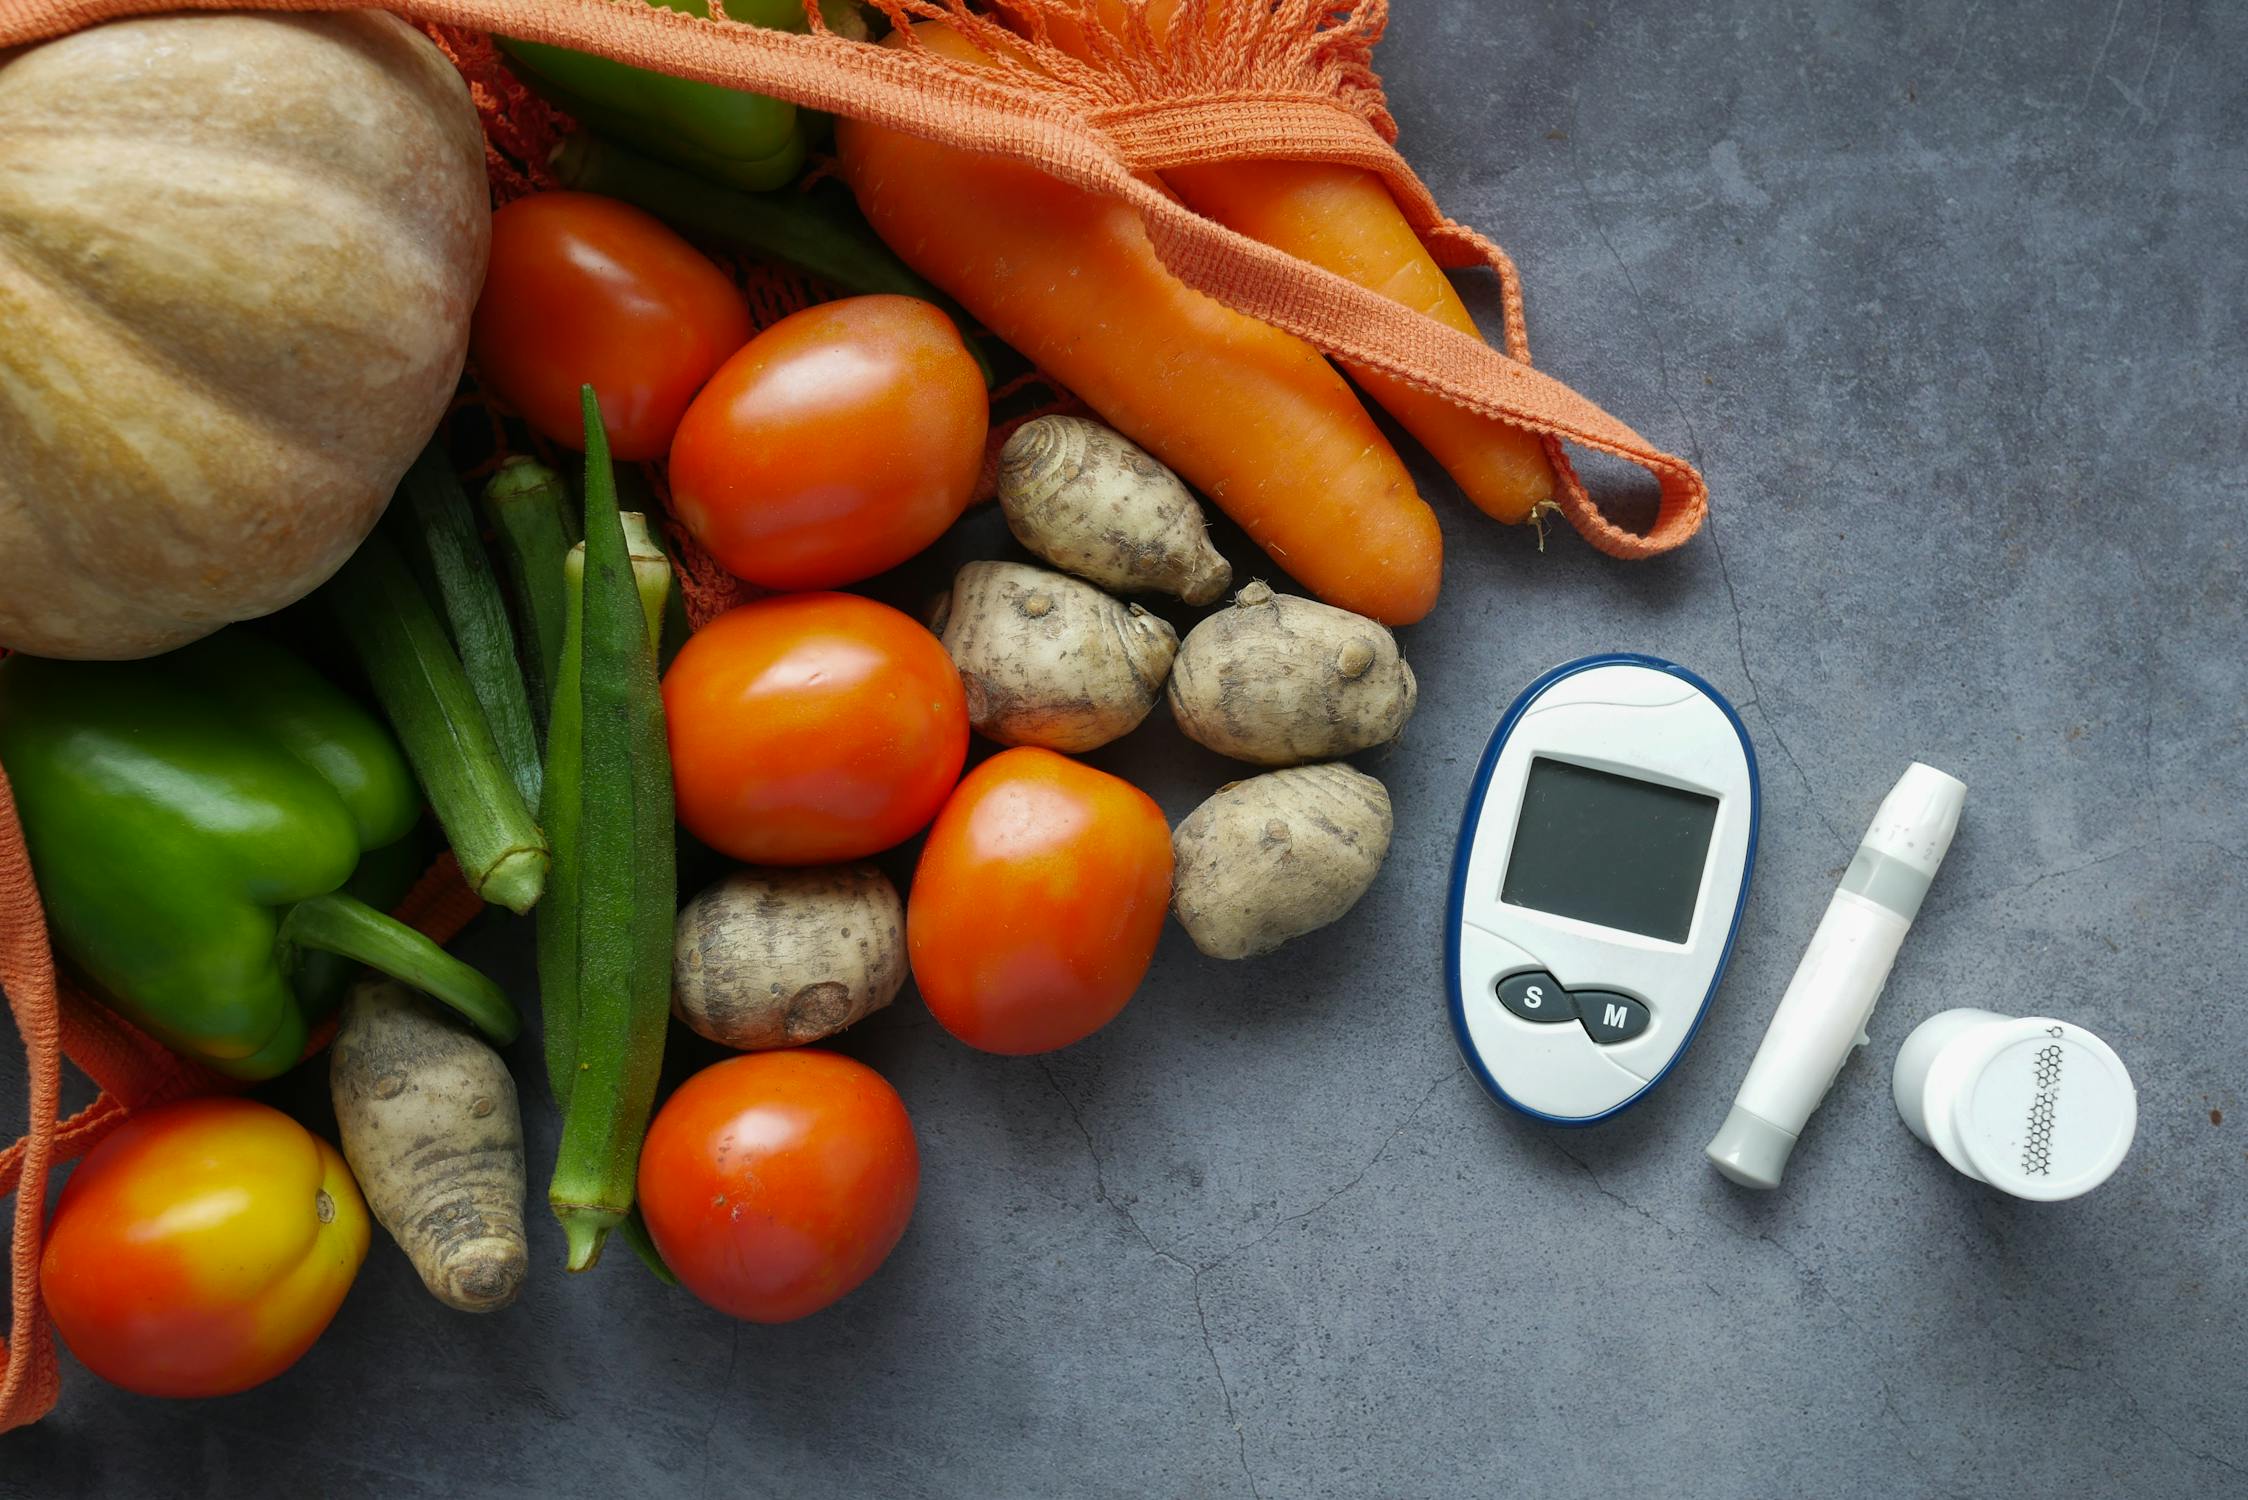 Diabetes Wellness with vegetables and fruits